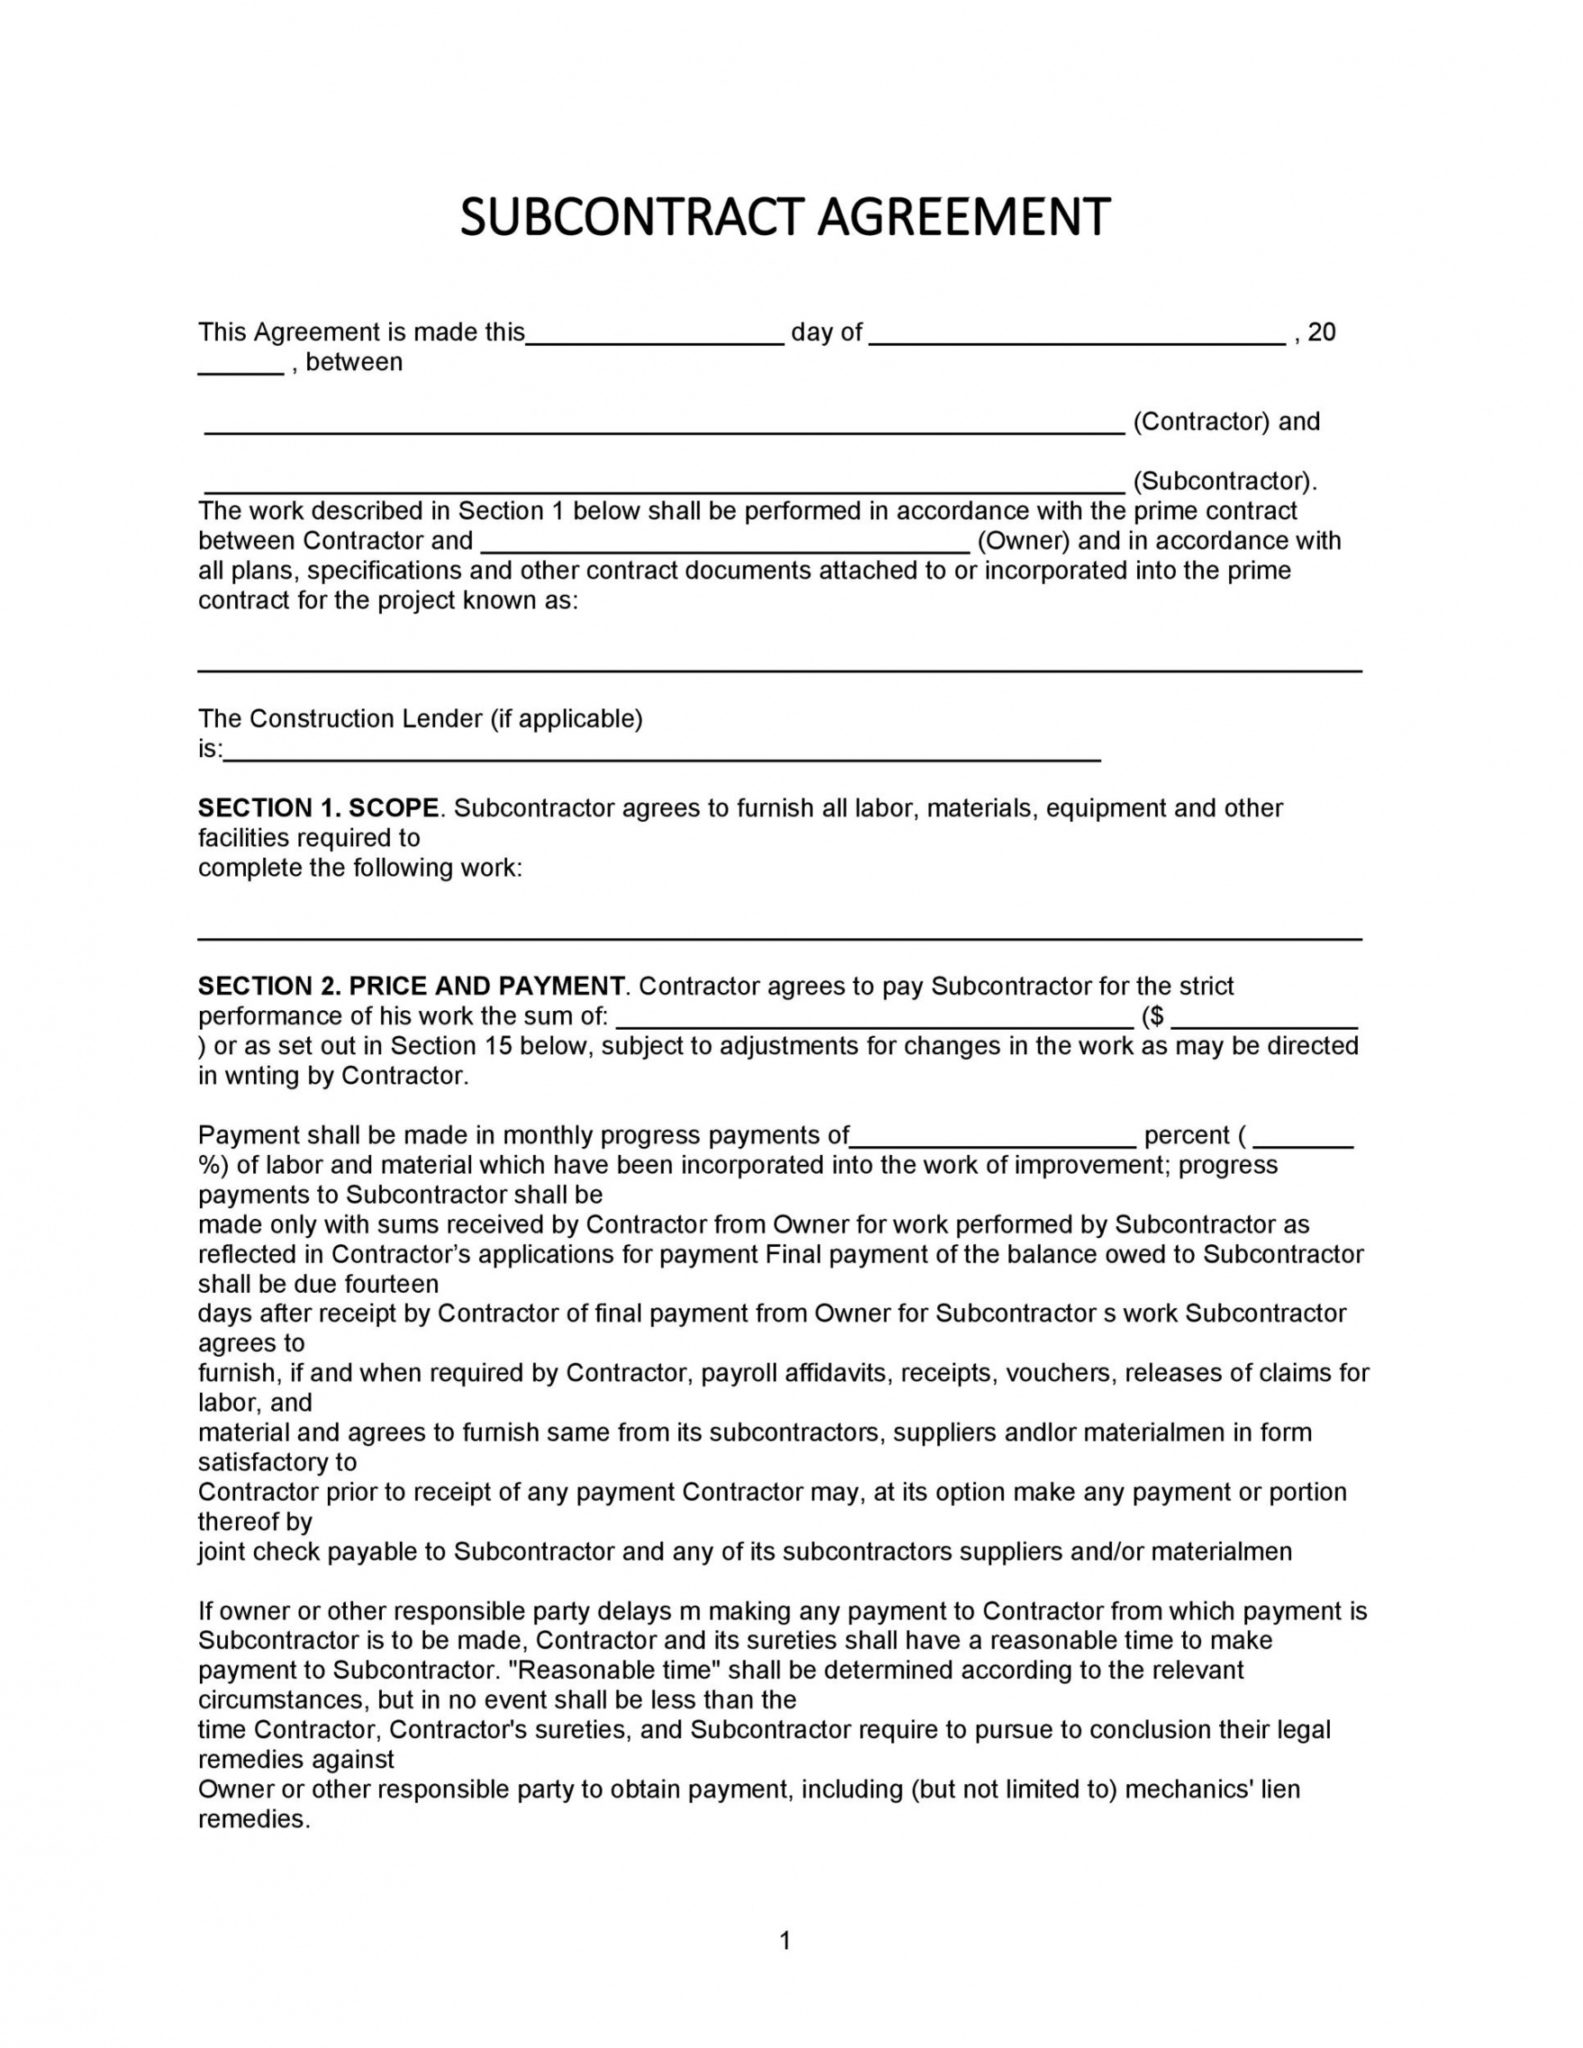 printable-need-a-subcontractor-agreement-39-free-templates-here